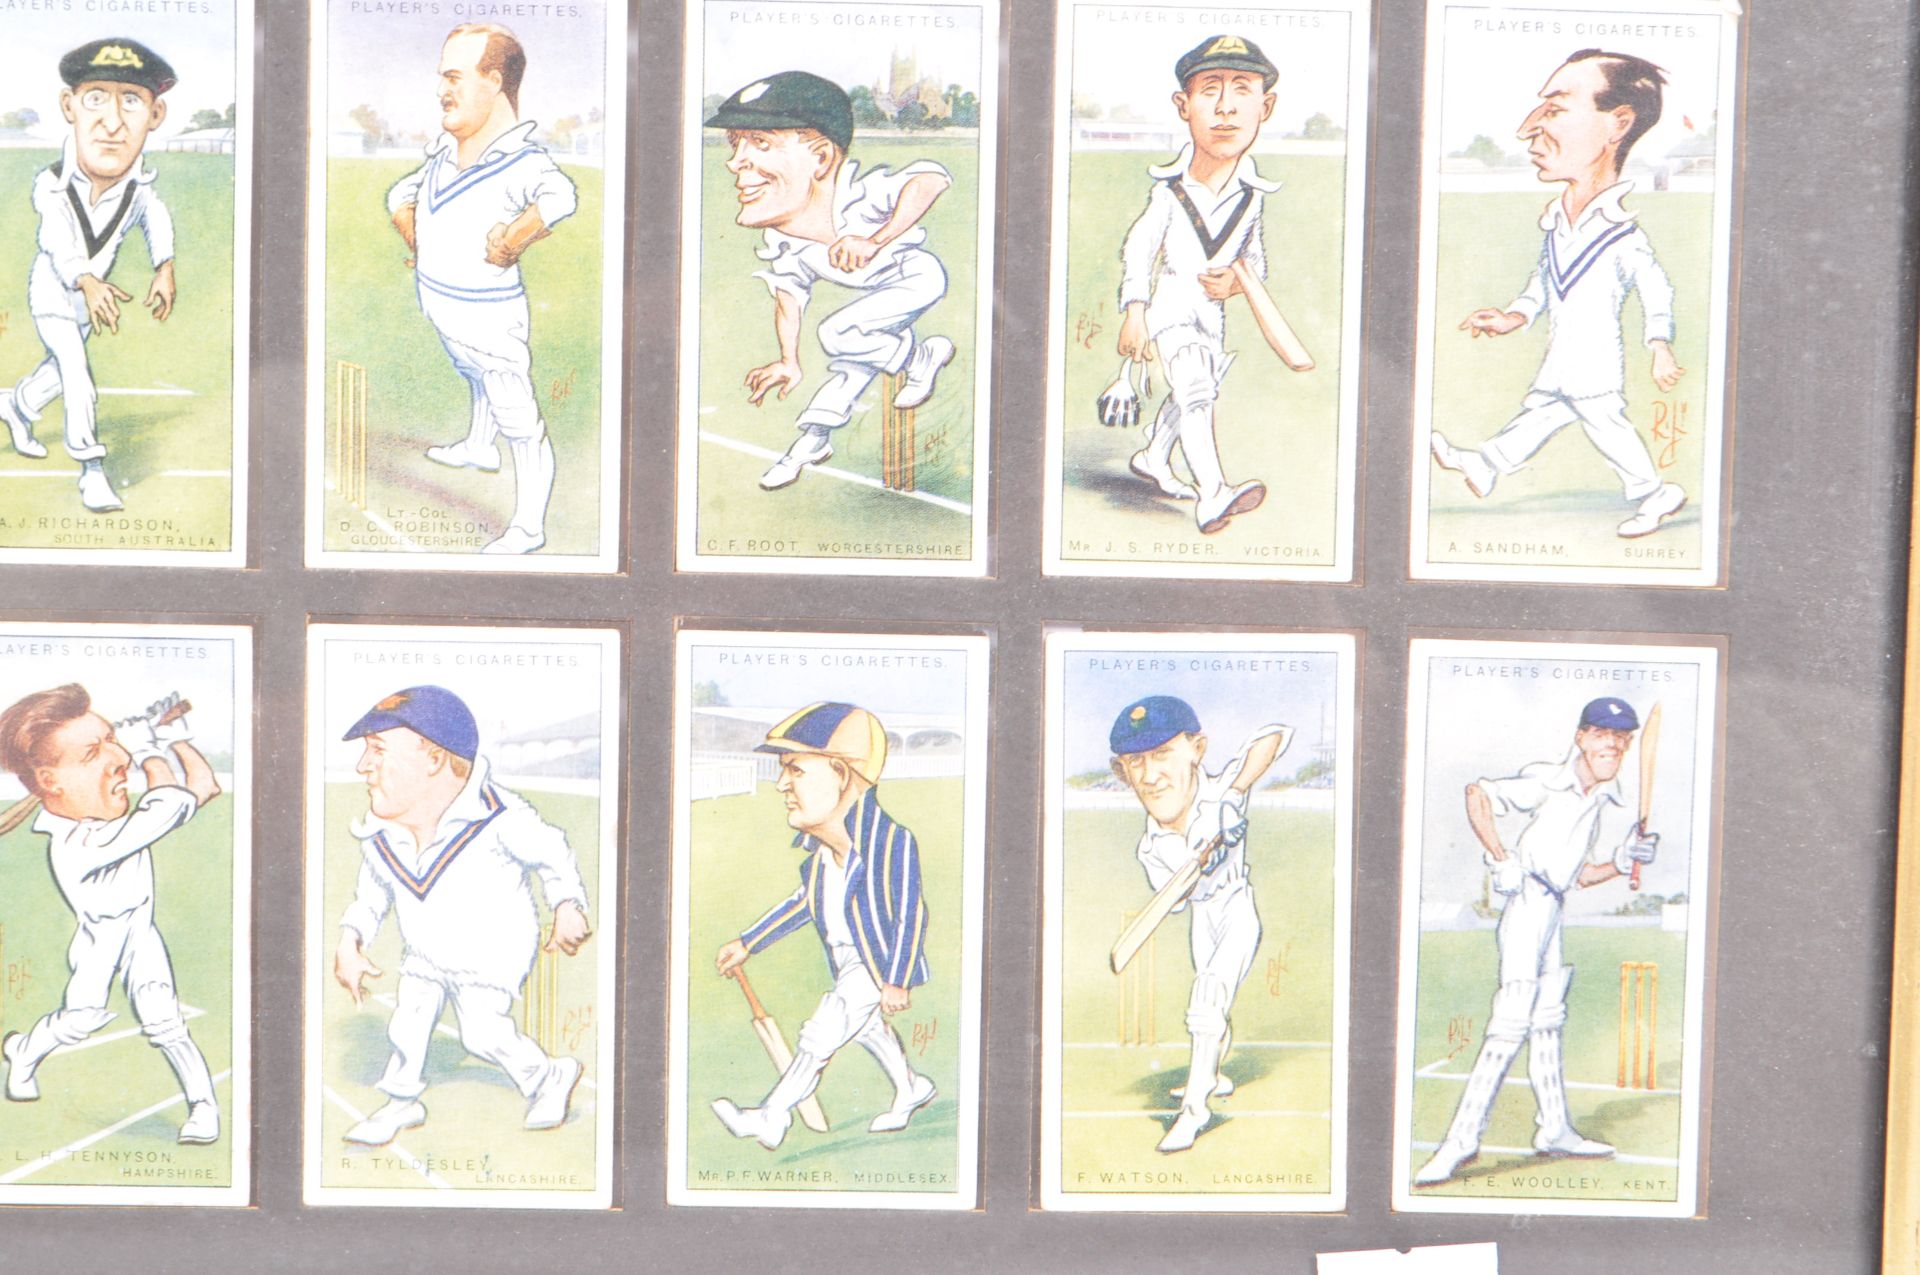 PLAYERS CIGARETTES - COLLECTION OF CRICKET CIGARETTE CARDS - Image 6 of 8